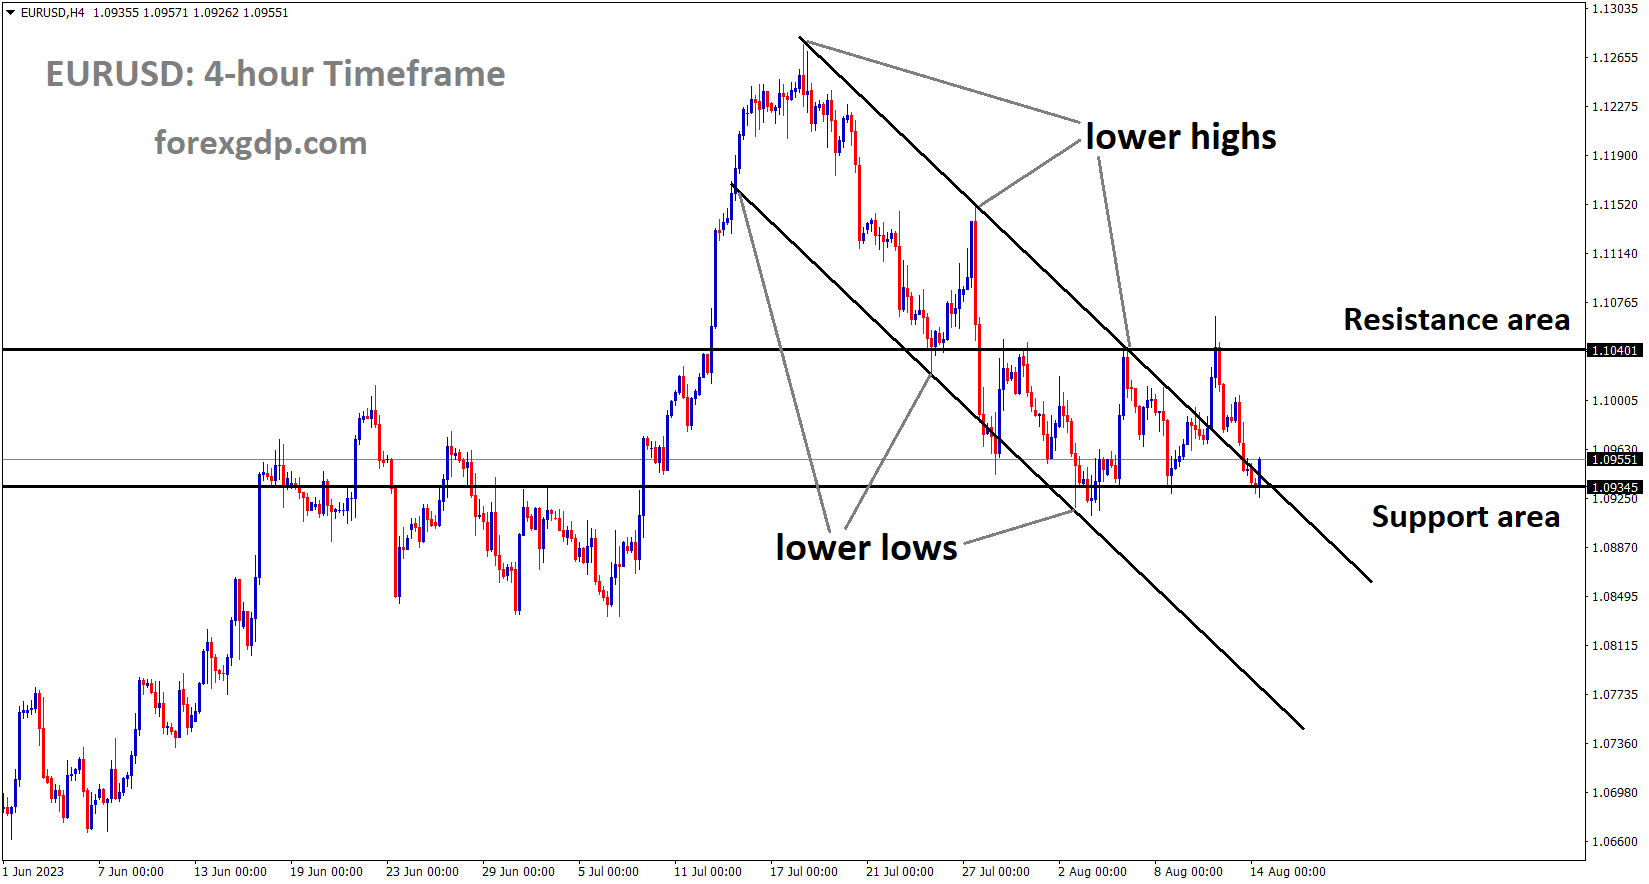 EURUSD is moving in the Descending channel and the minor Box pattern